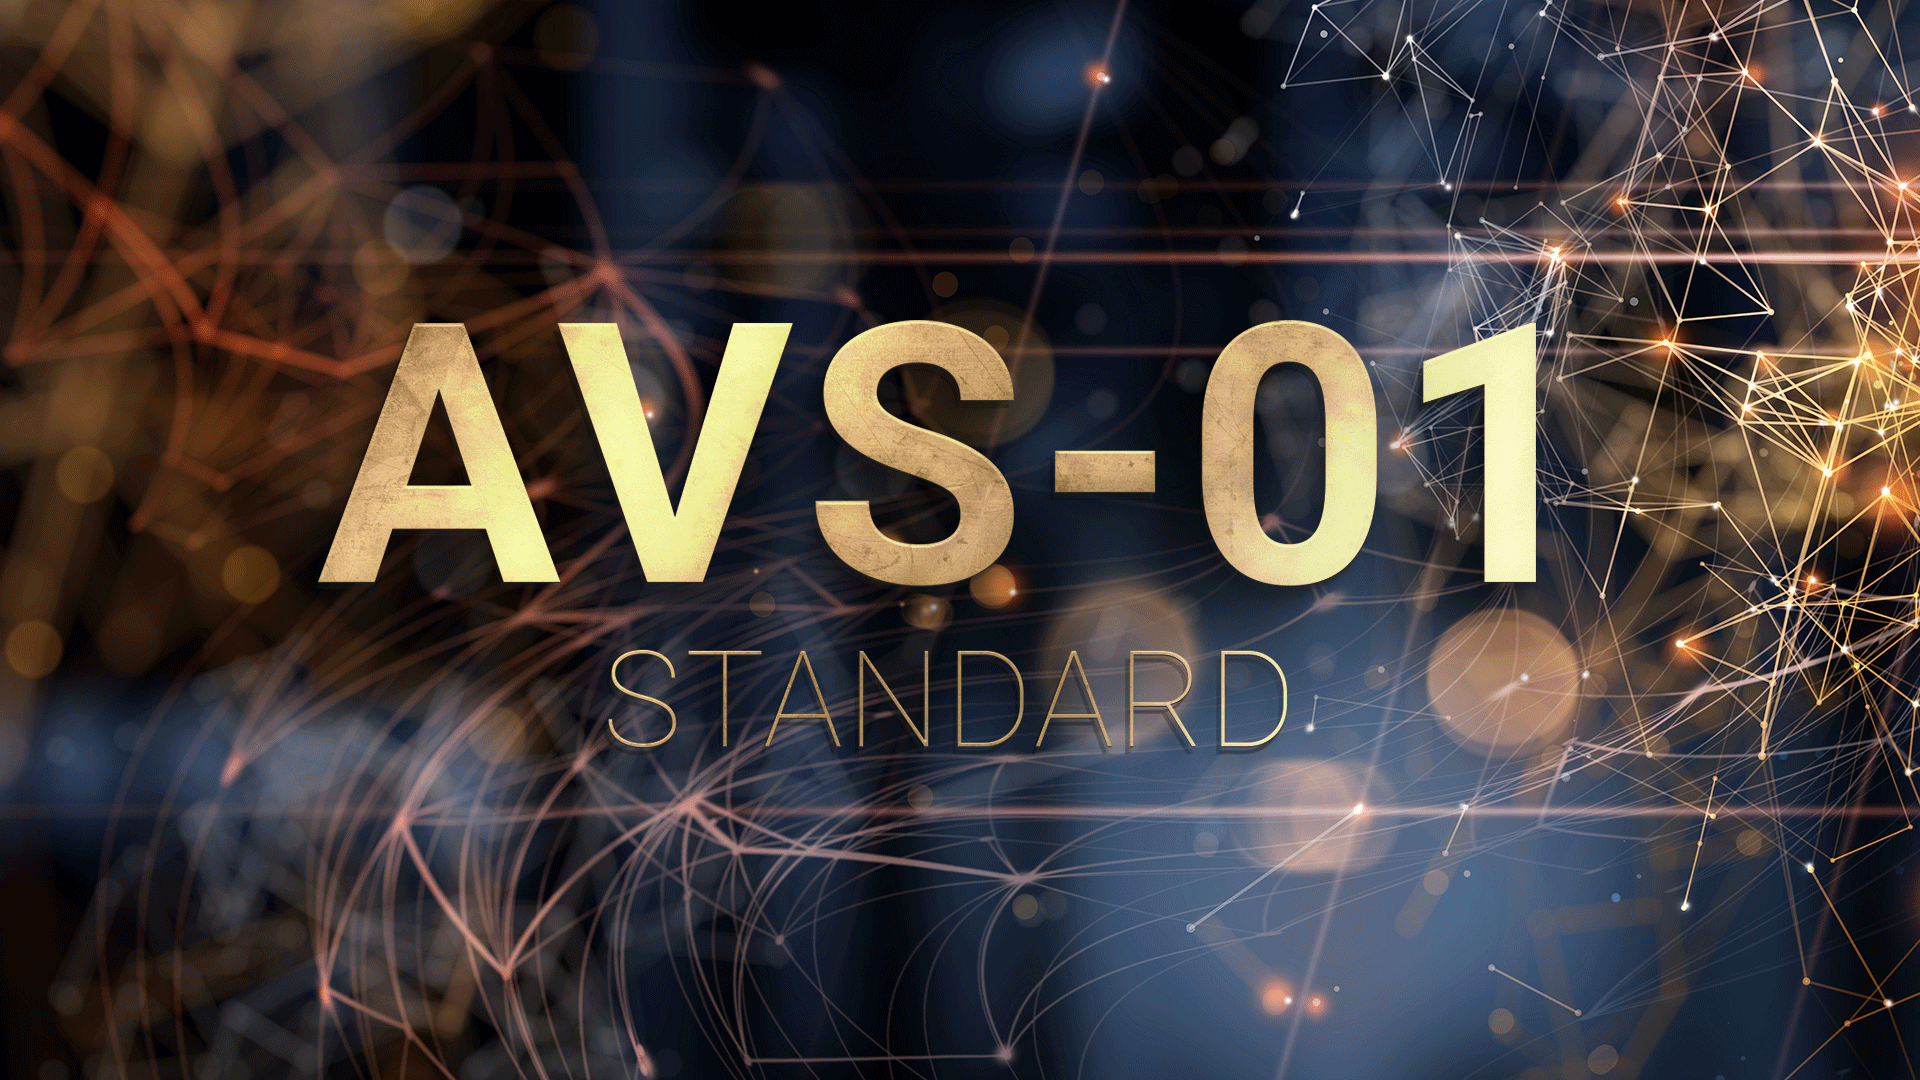 An image that says: AVS-01 STANDARD.